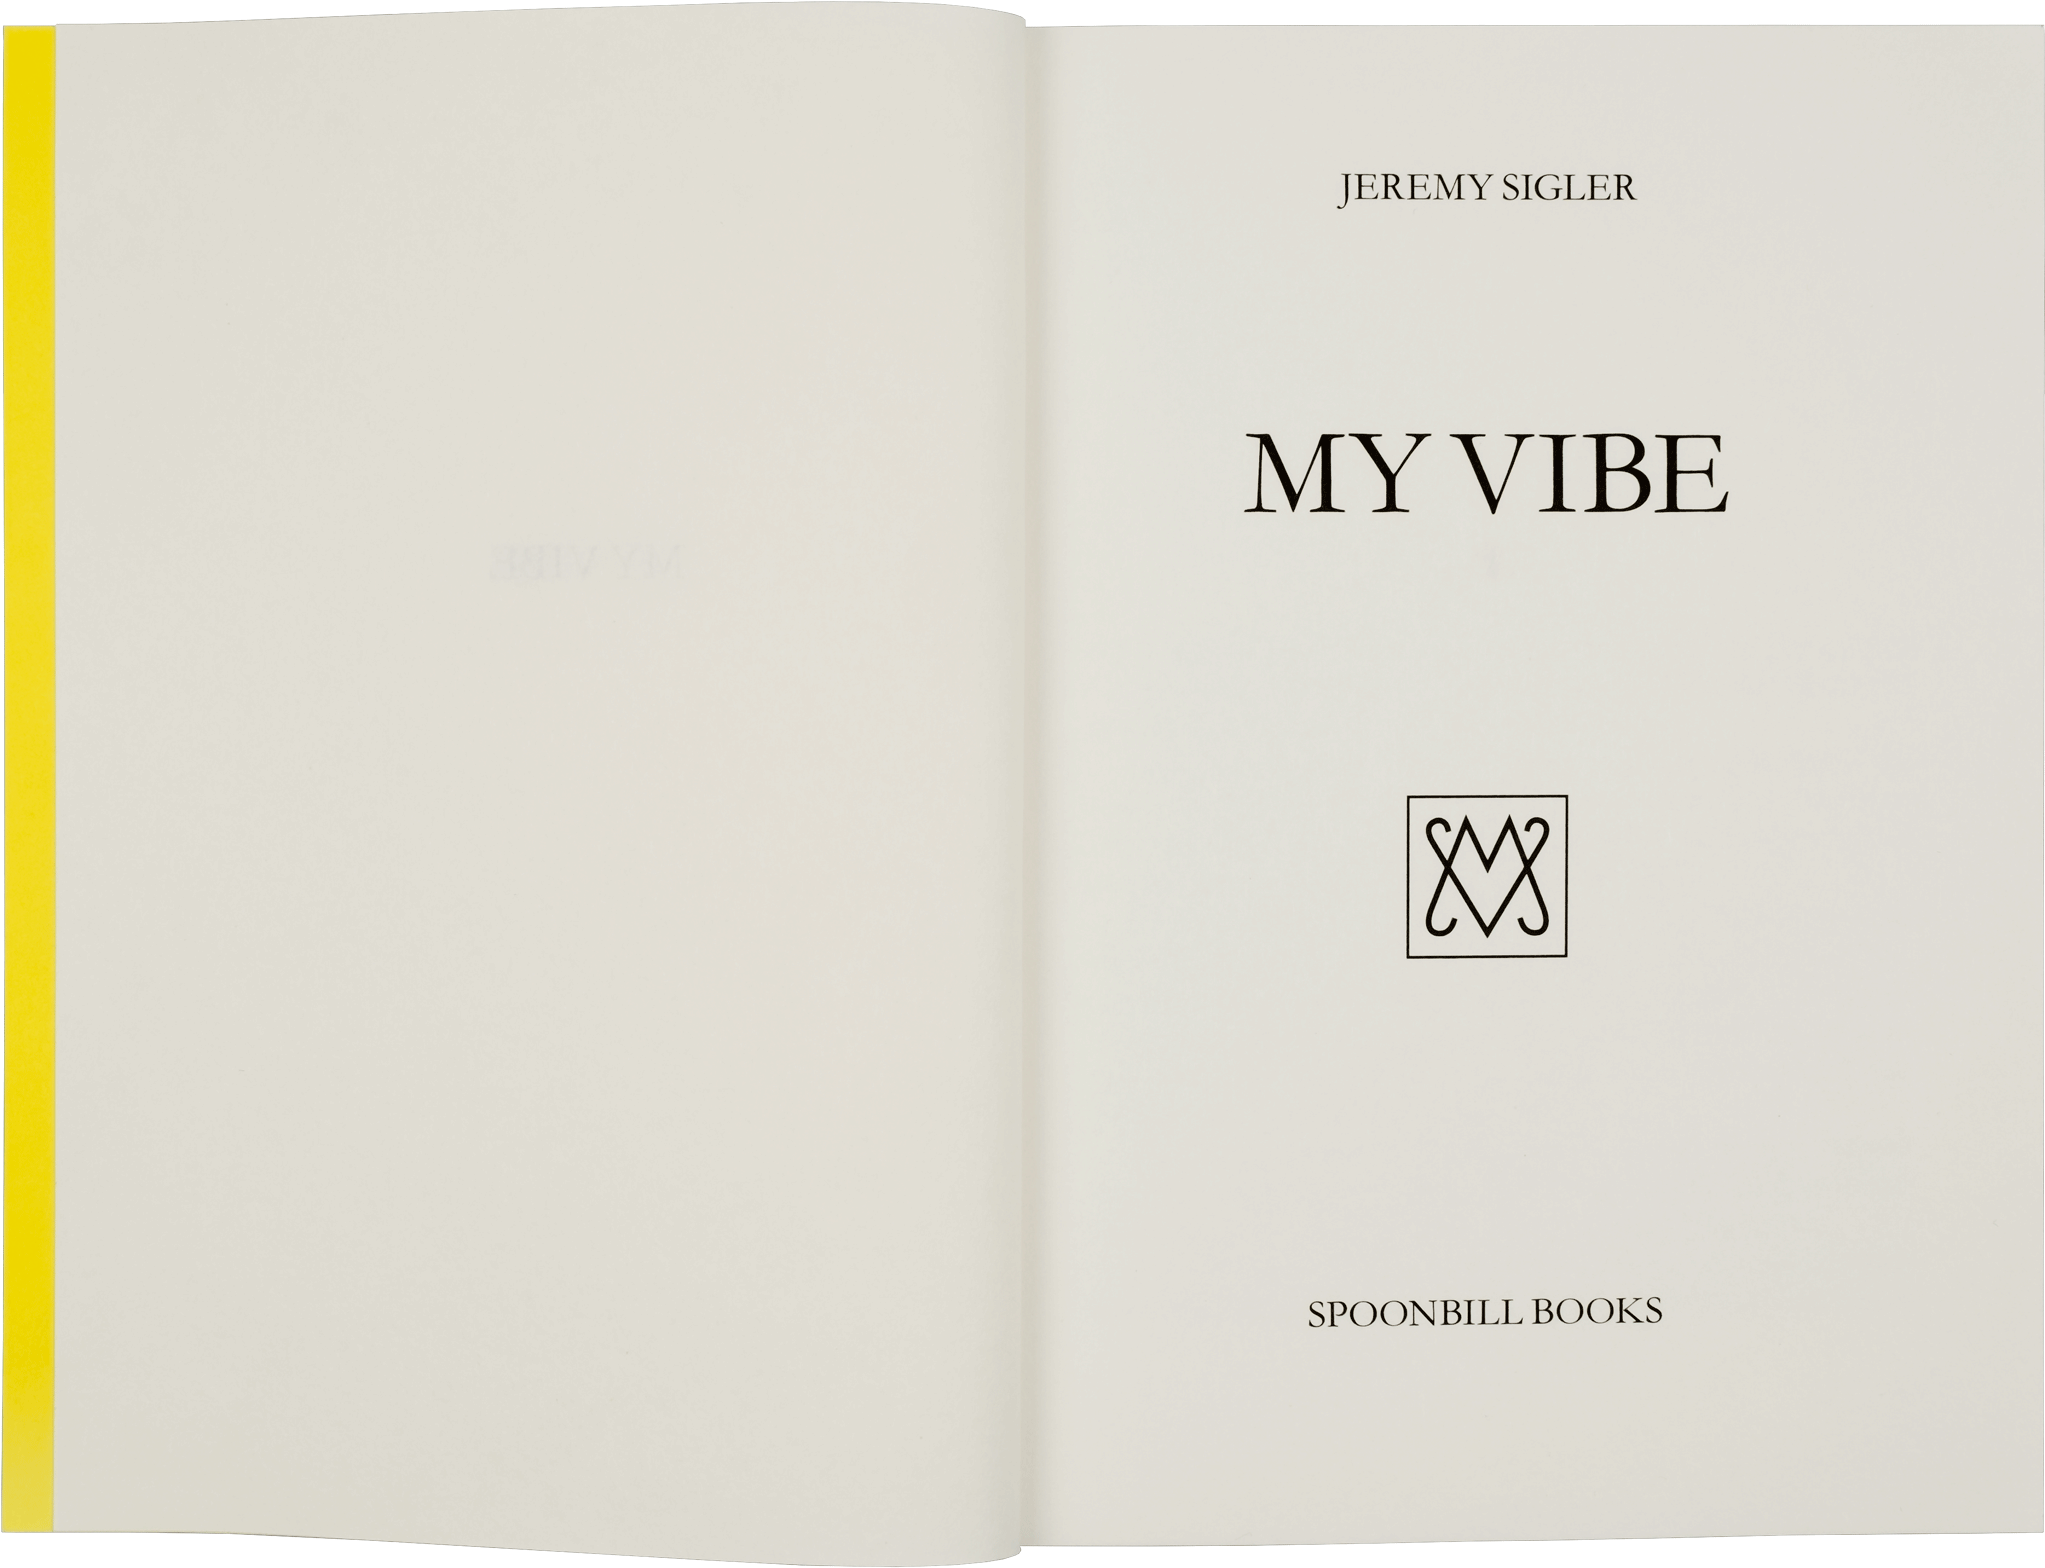 Title page of My Vibe book